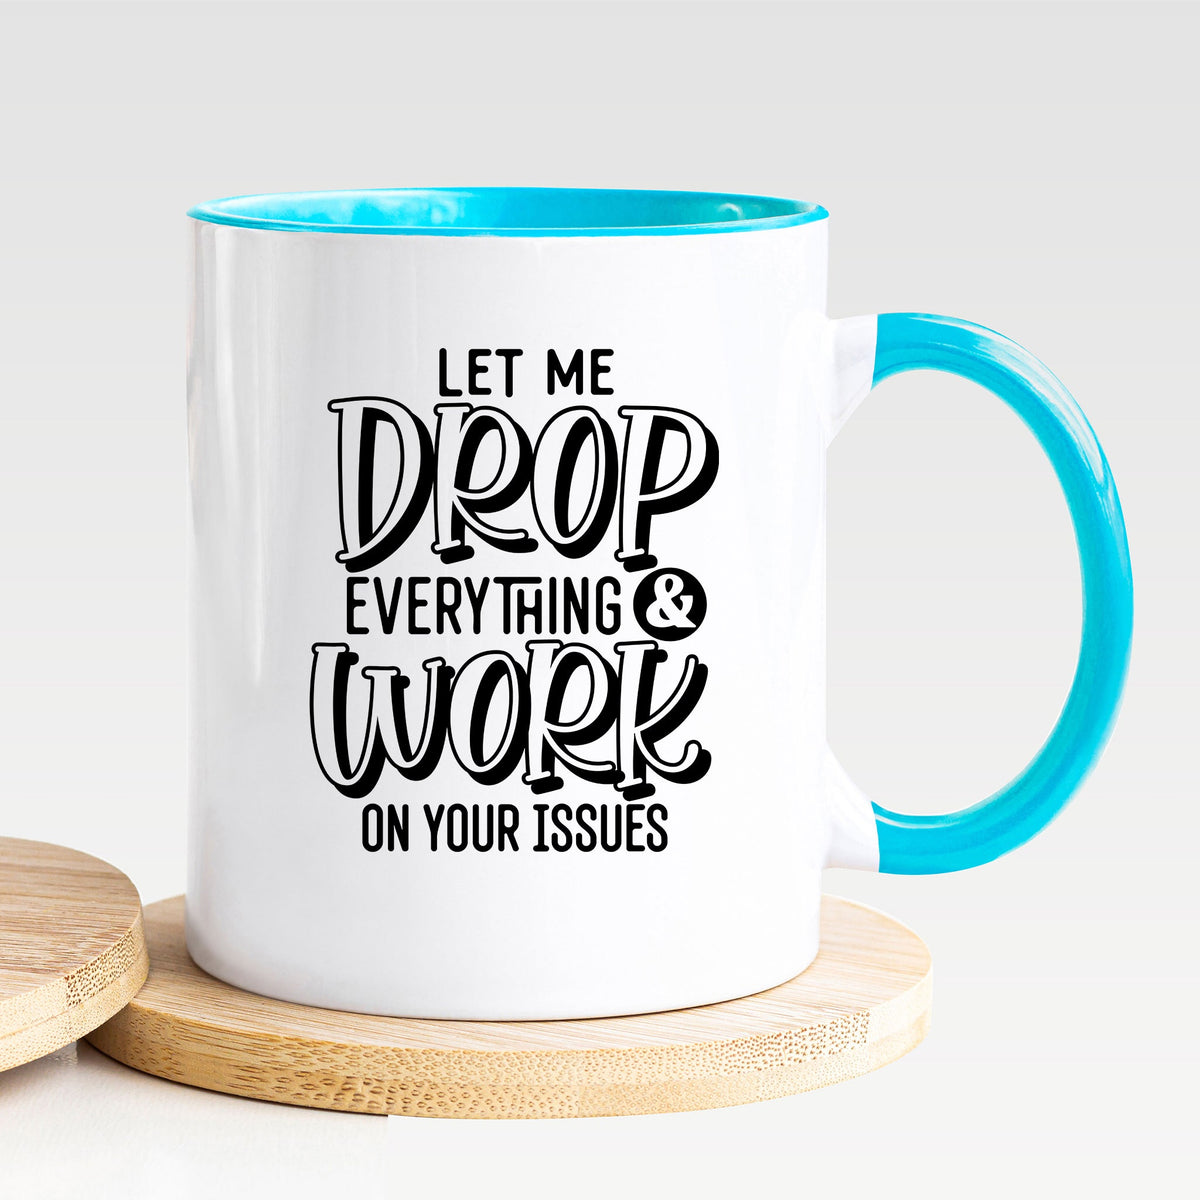 Let Me Drop Everything & Work On Your Issues - Mug